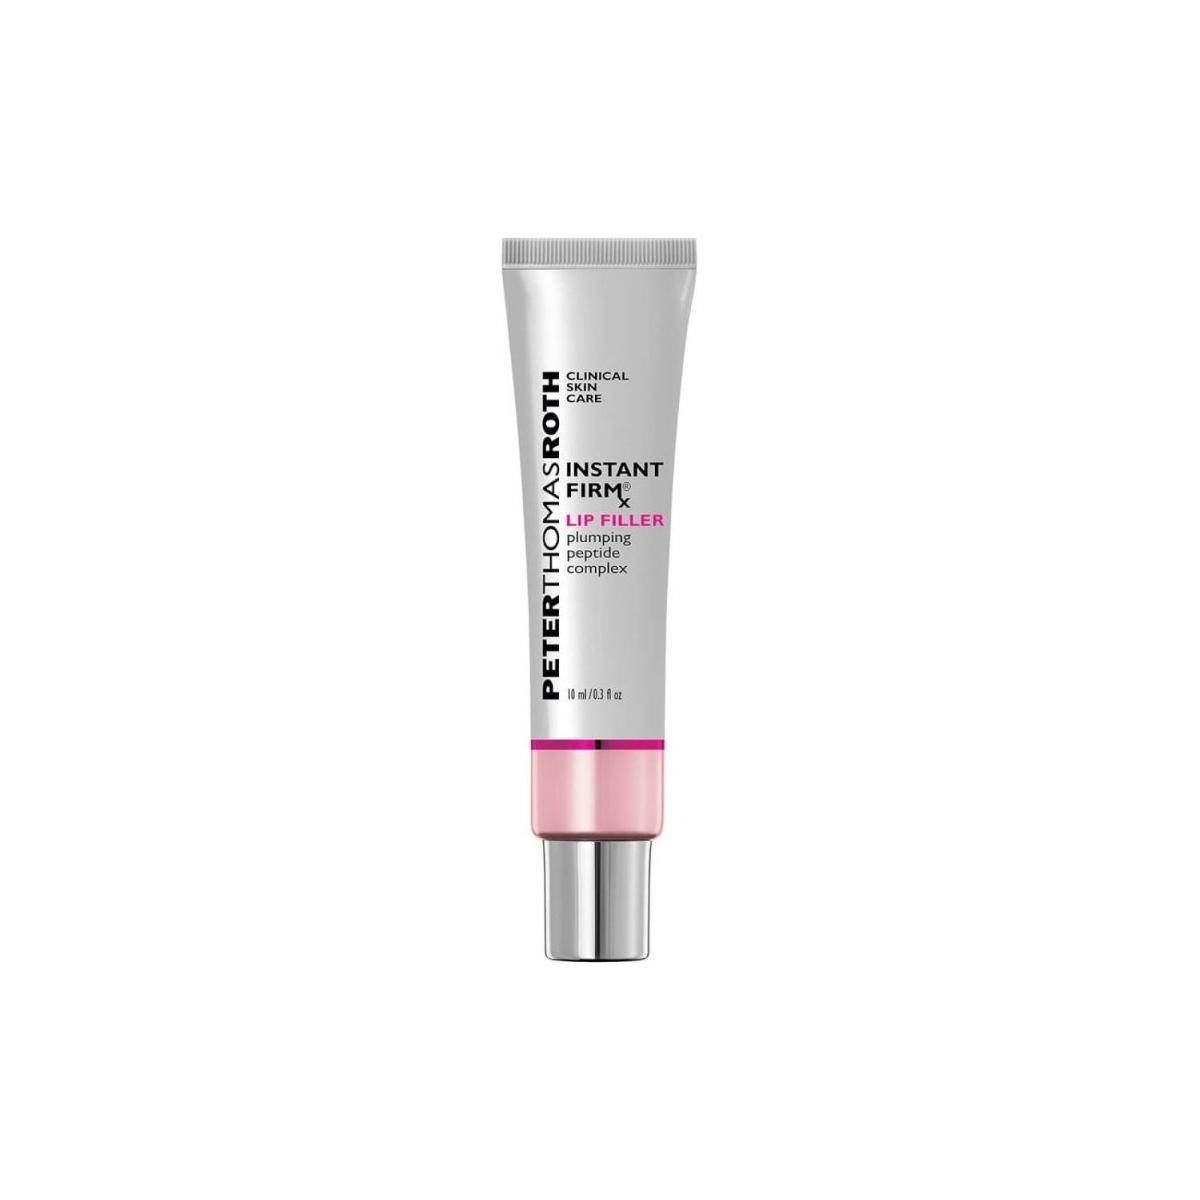 Peter Thomas Roth Instant FIRMx Lip Treatment 30g - Glam Global UK